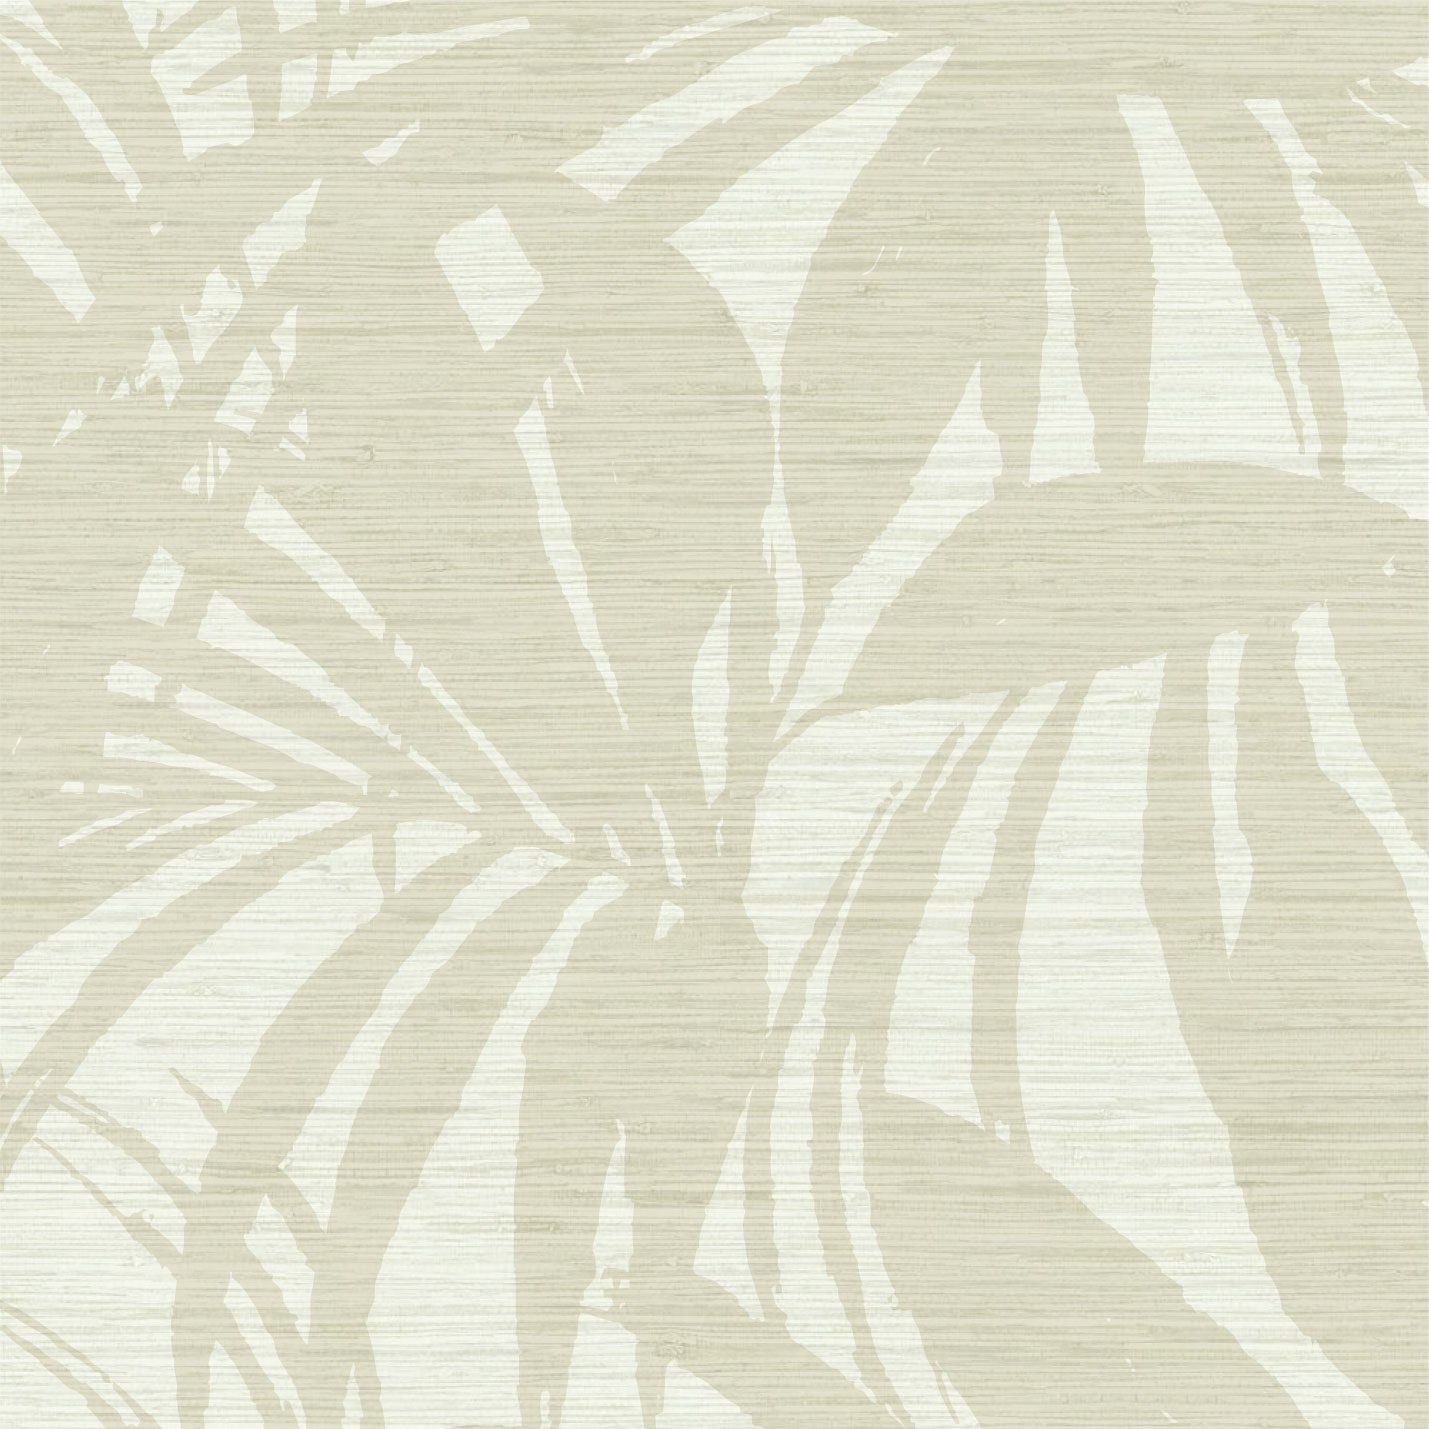 printed grasscloth wallpaper oversize tropical leaf Natural Textured Eco-Friendly Non-toxic High-quality  Sustainable practices Sustainability Interior Design Wall covering Bold retro chic custom jungle garden botanical Seaside Coastal Seashore Waterfront Vacation home styling Retreat Relaxed beach vibes Beach cottage Shoreline Oceanfront white tan sand neutral off-white